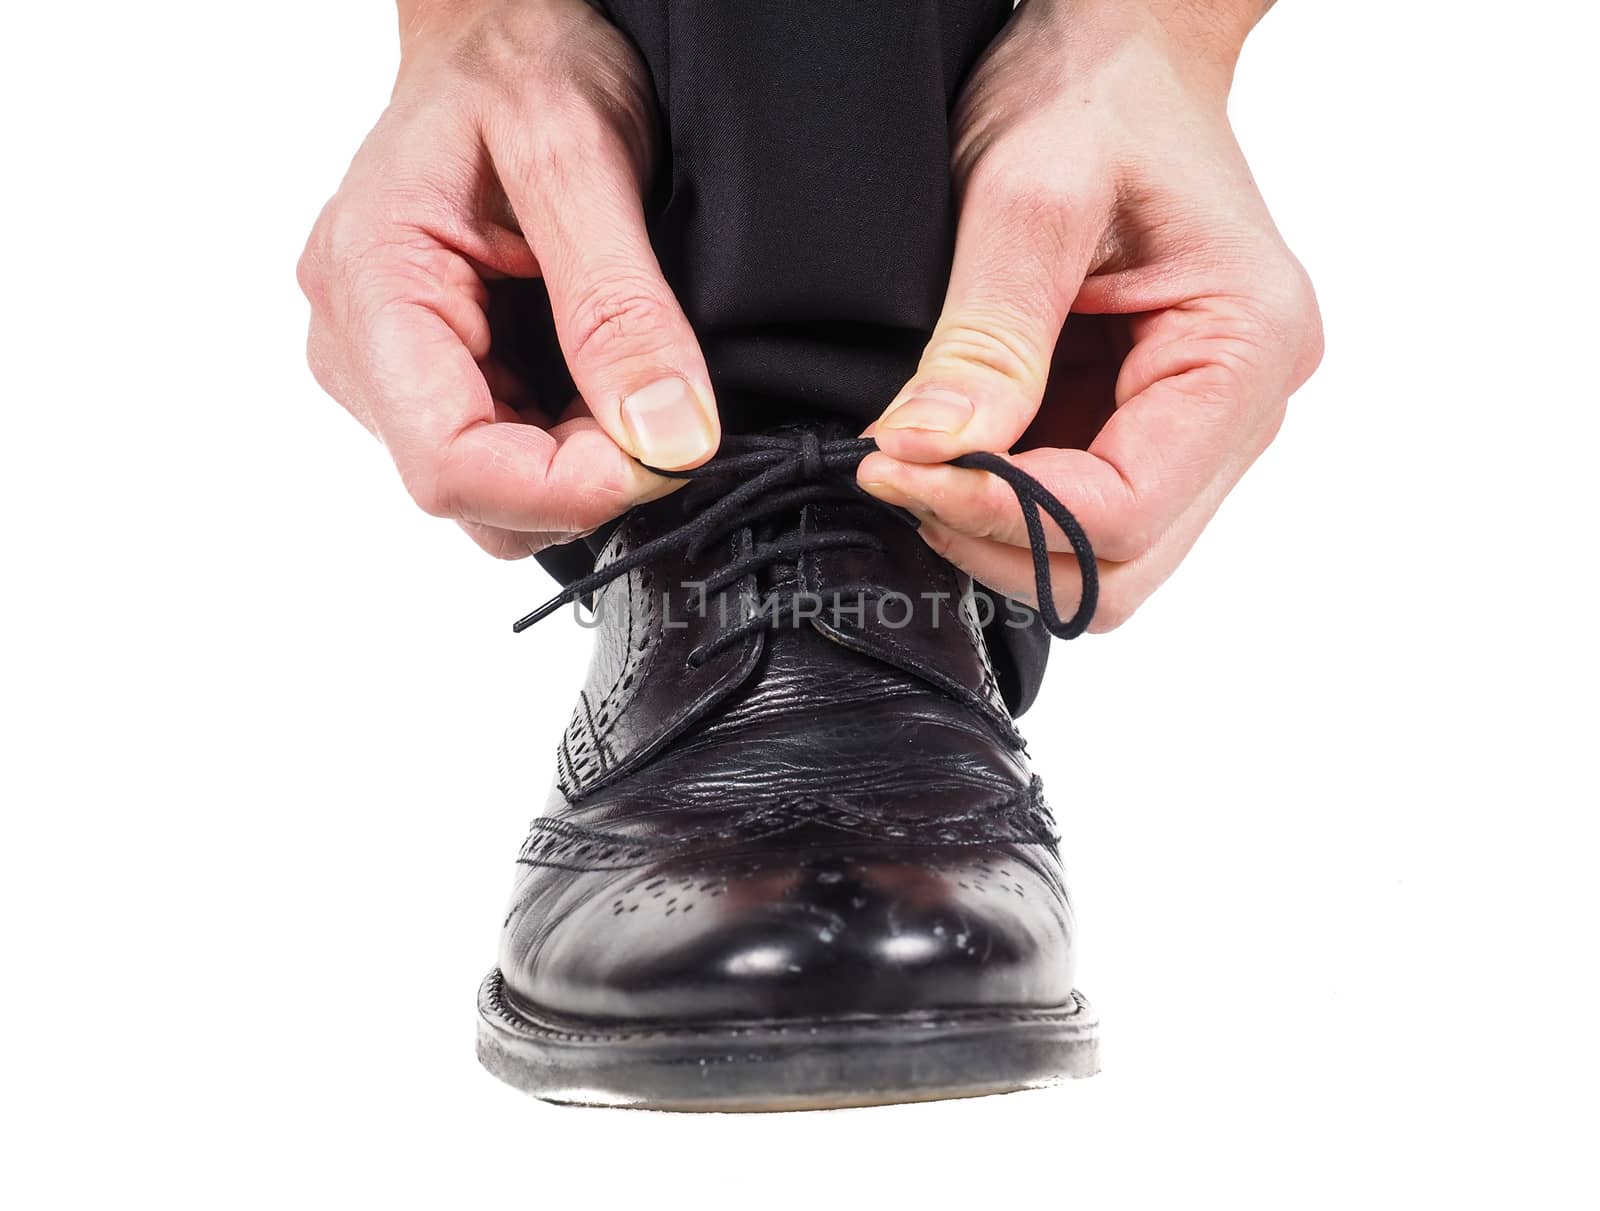 Male hands tying shoelaces on black leather shoes by Arvebettum